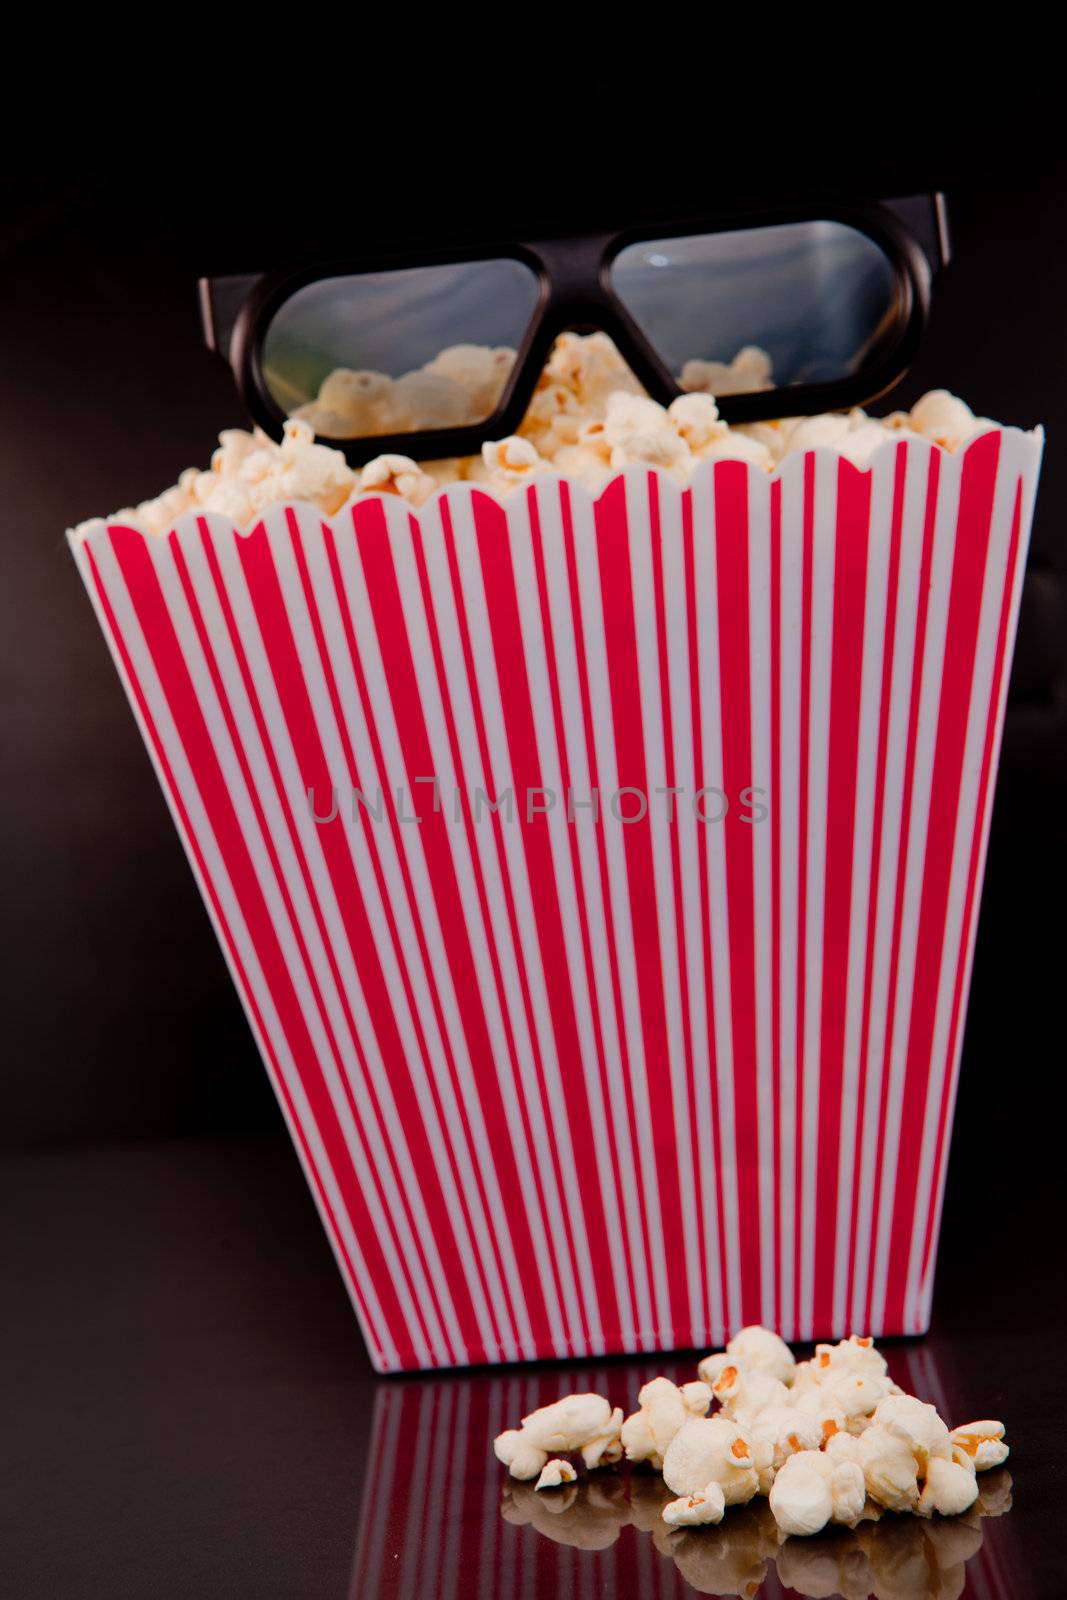 3D glasses on a box of pop corn against a black background